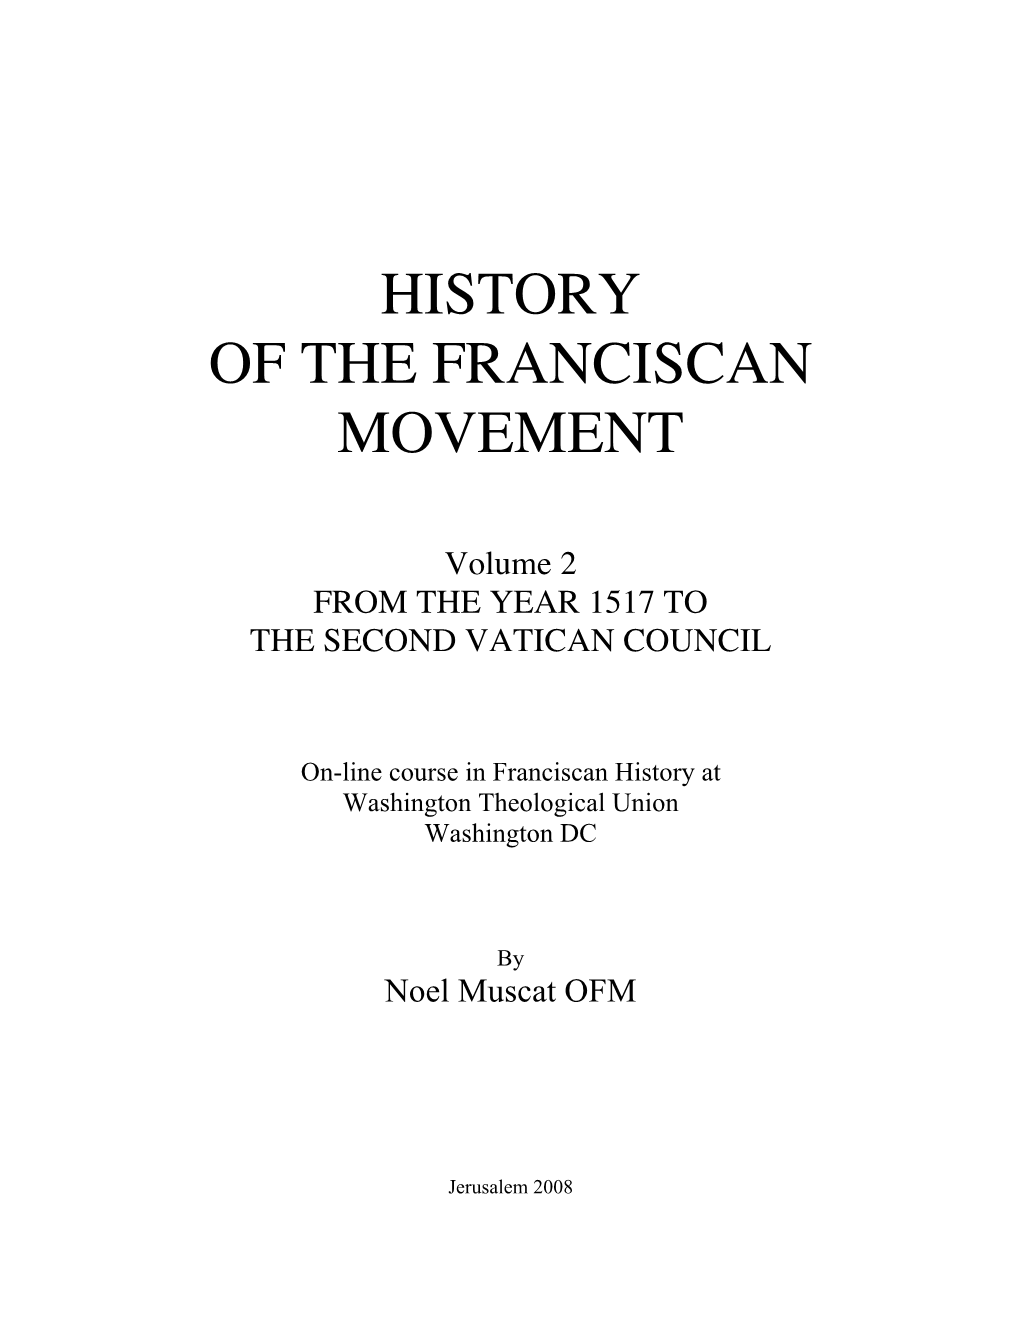 History of the Franciscan Movement